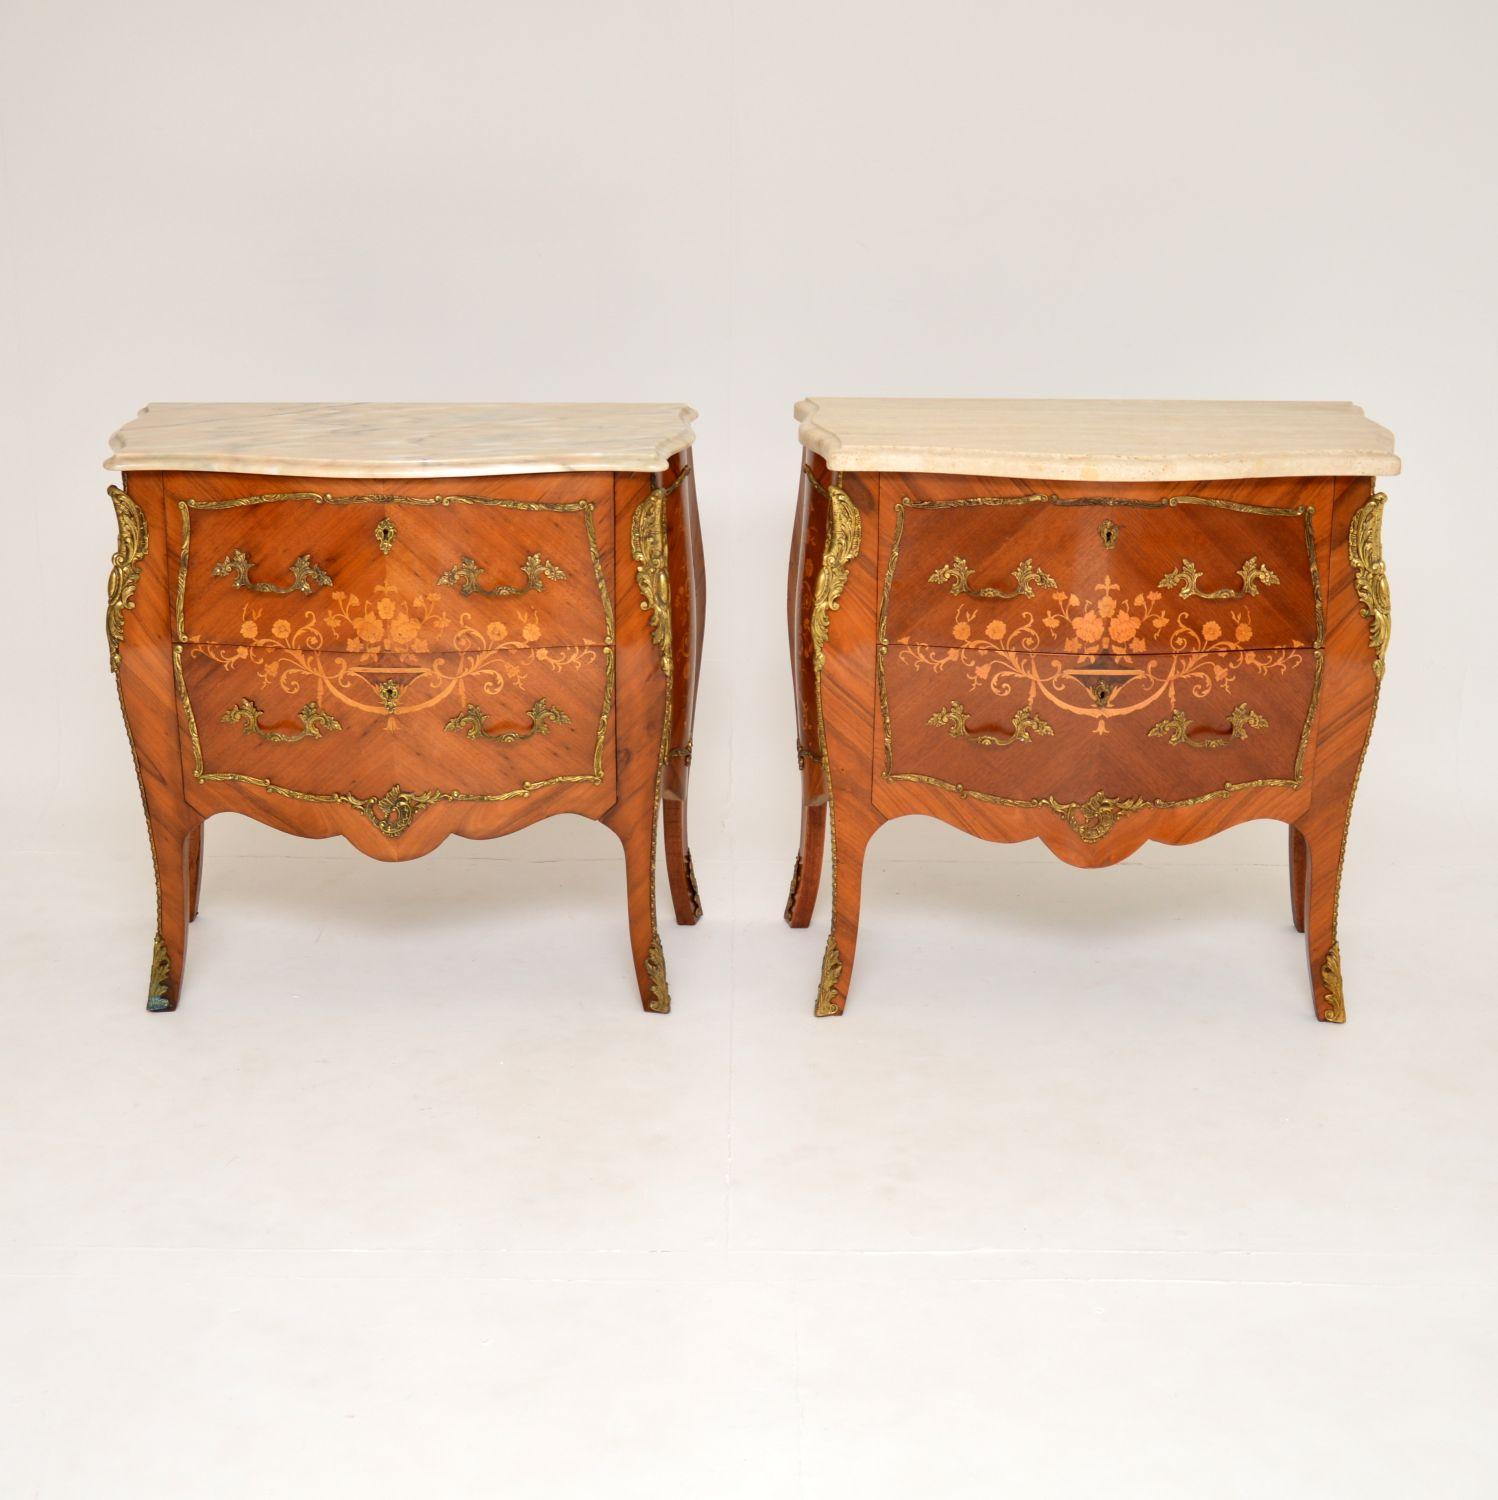 Louis XV Pair of Antique French Marble Top Inlaid Marquetry Commodes